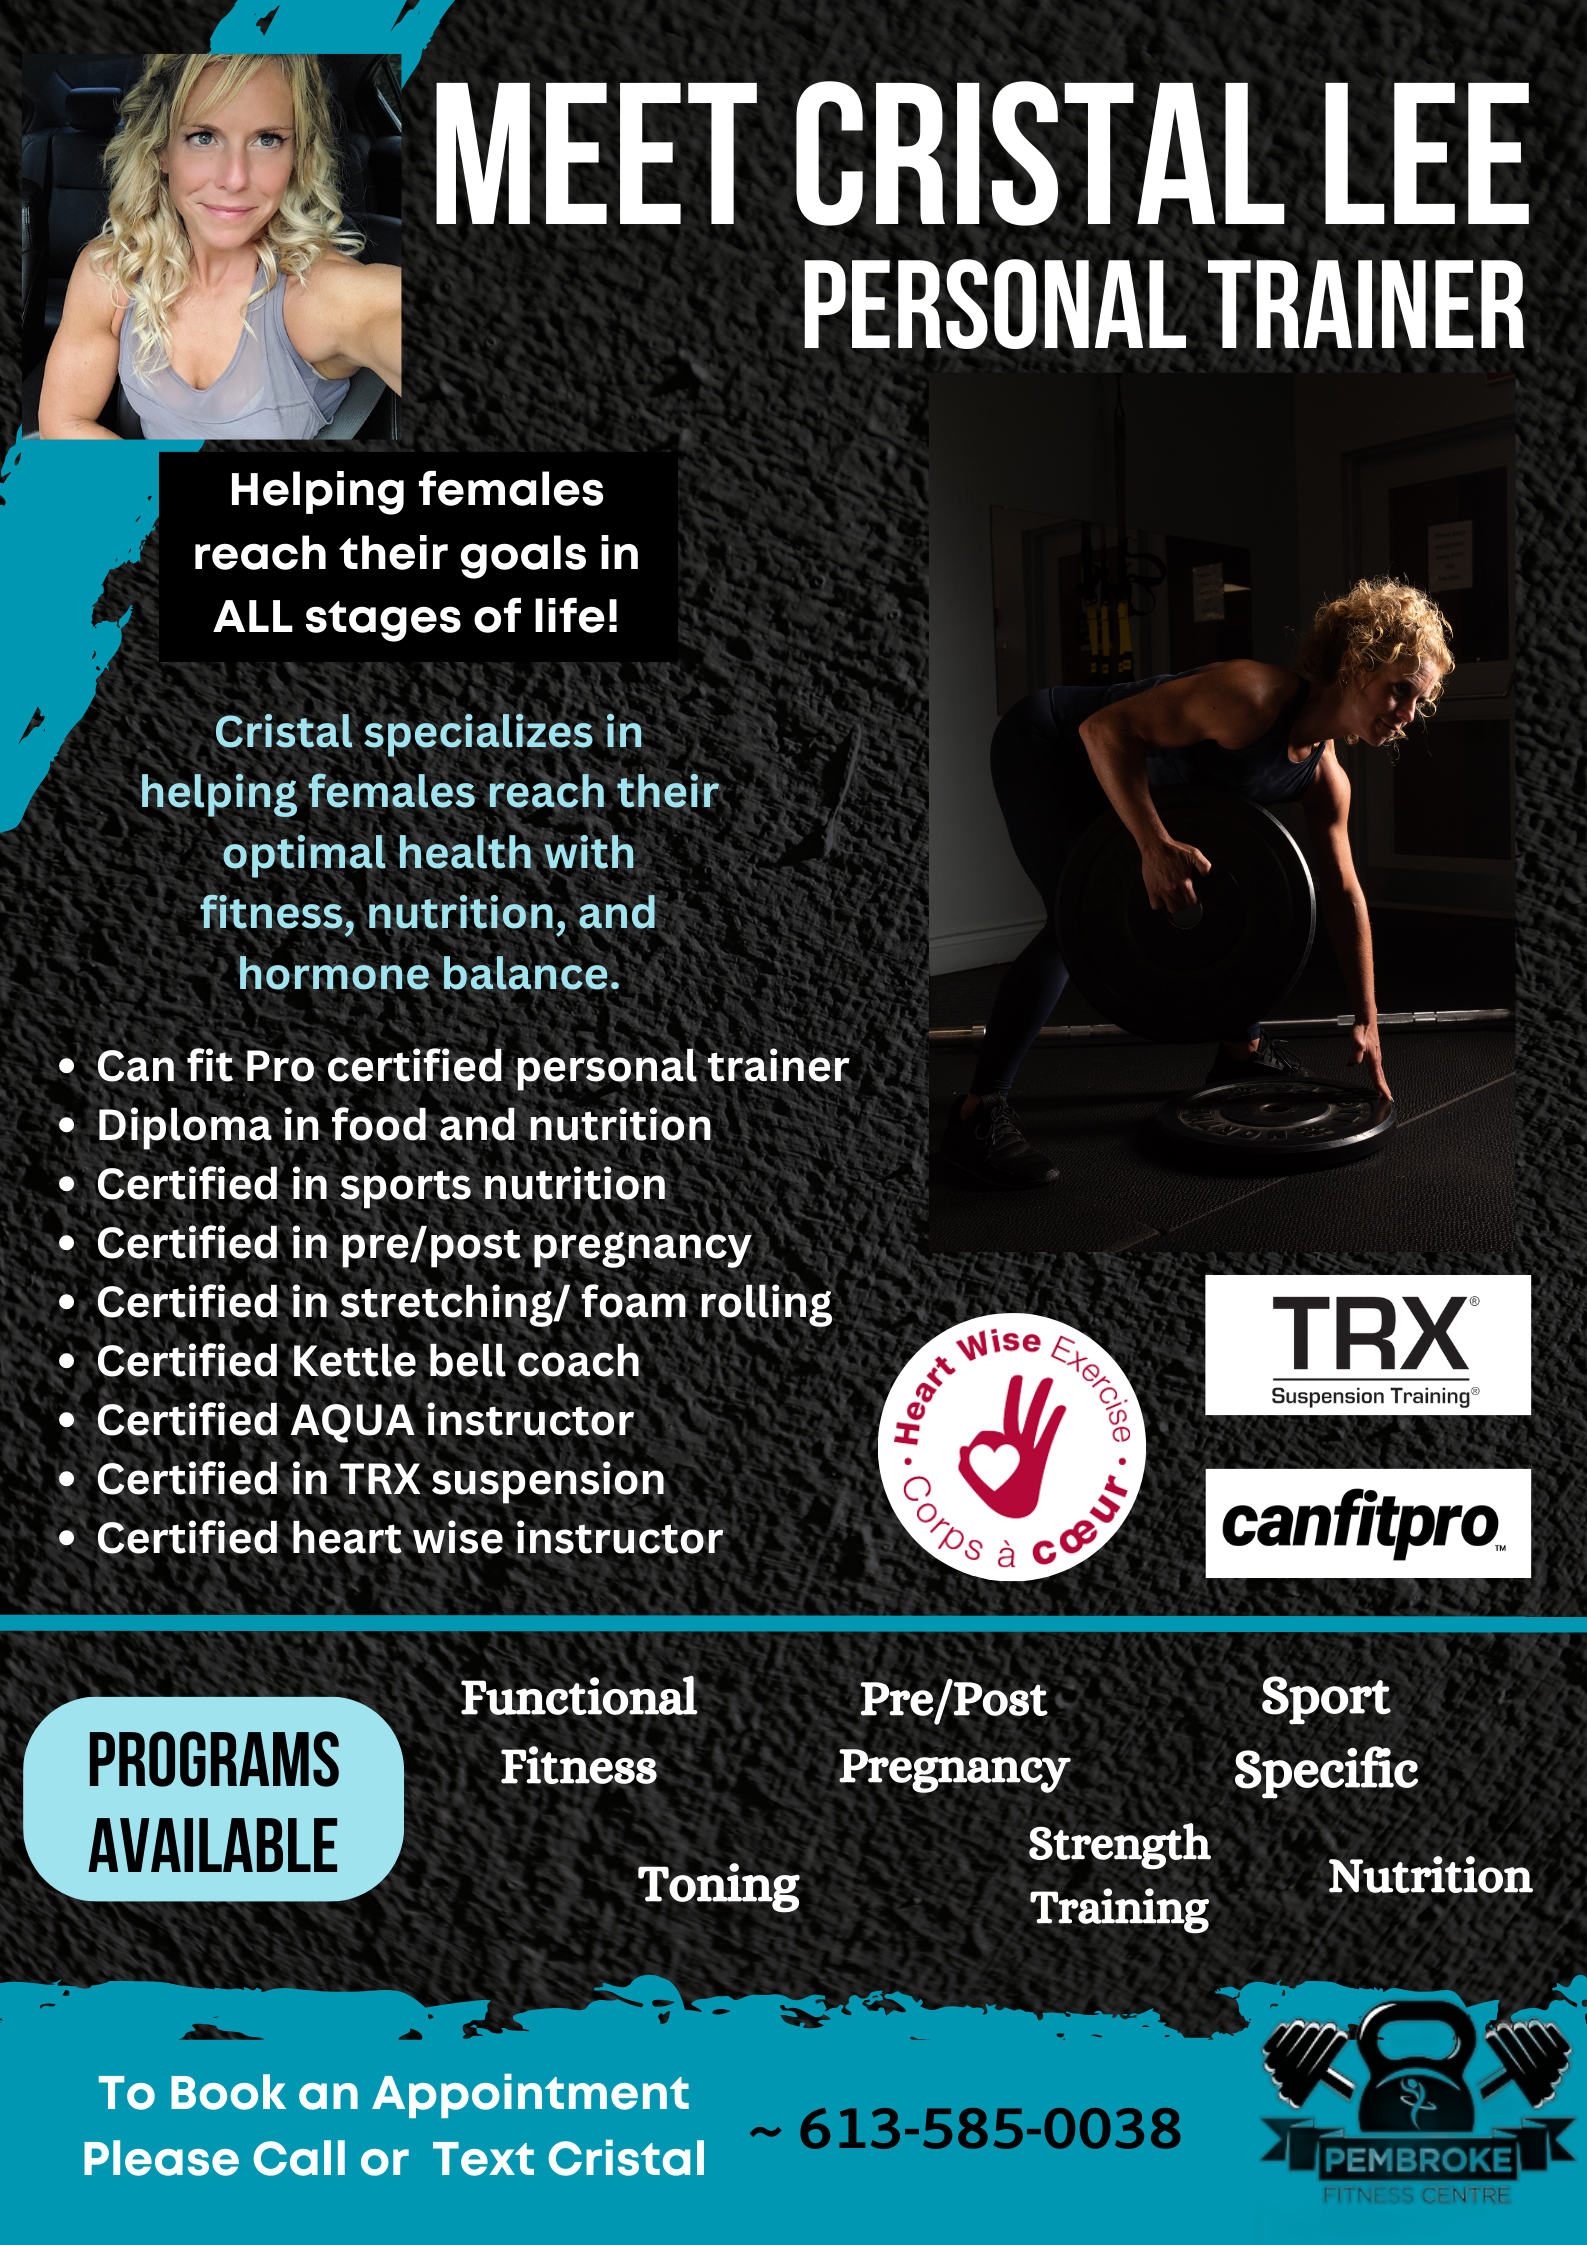 Personal Training Available